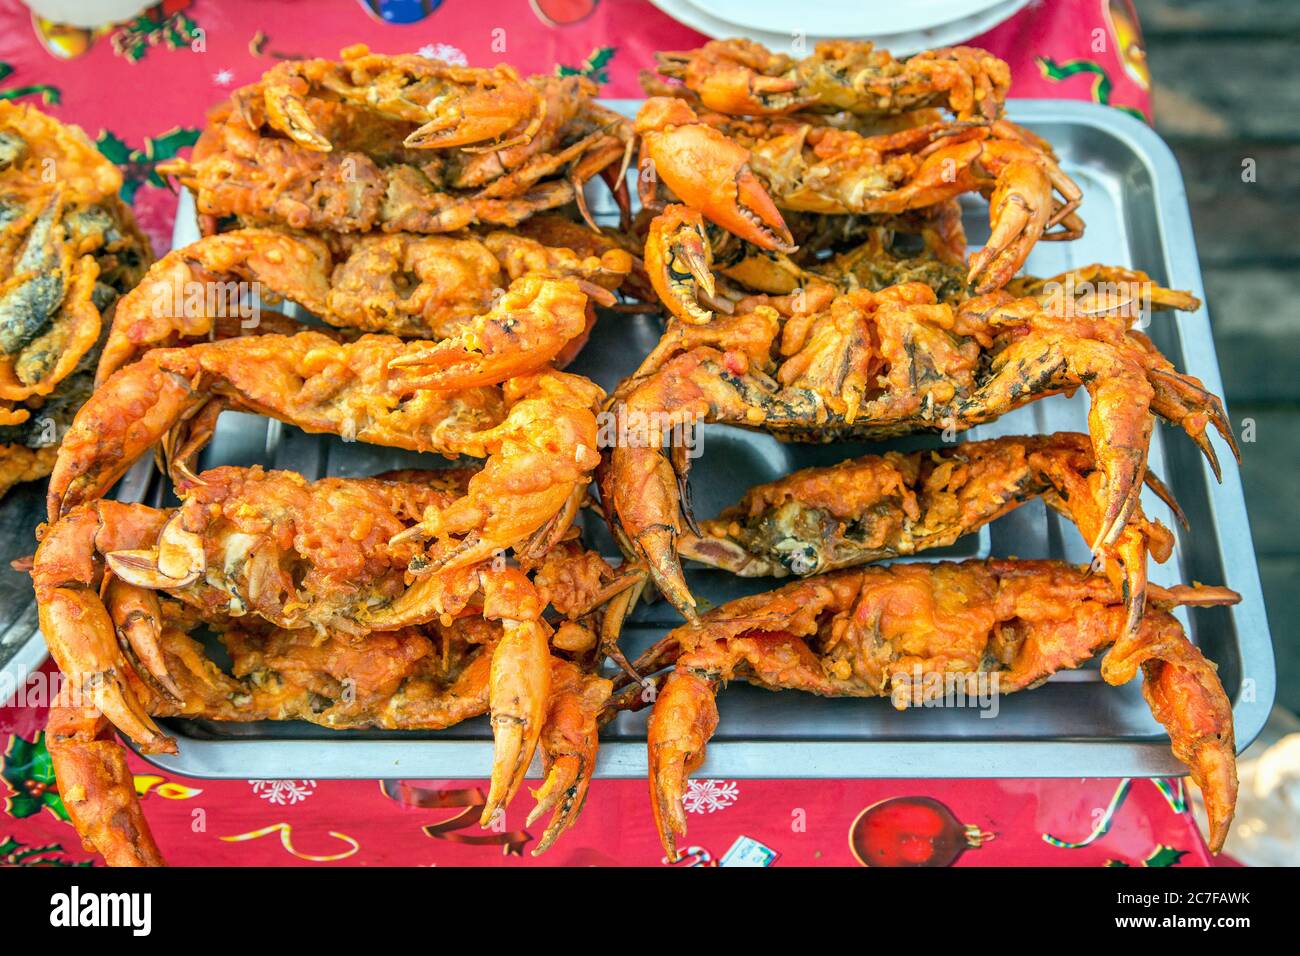 Close-up detail of fried crabs for sale at a street market in Mandalay, Myanmar Stock Photo